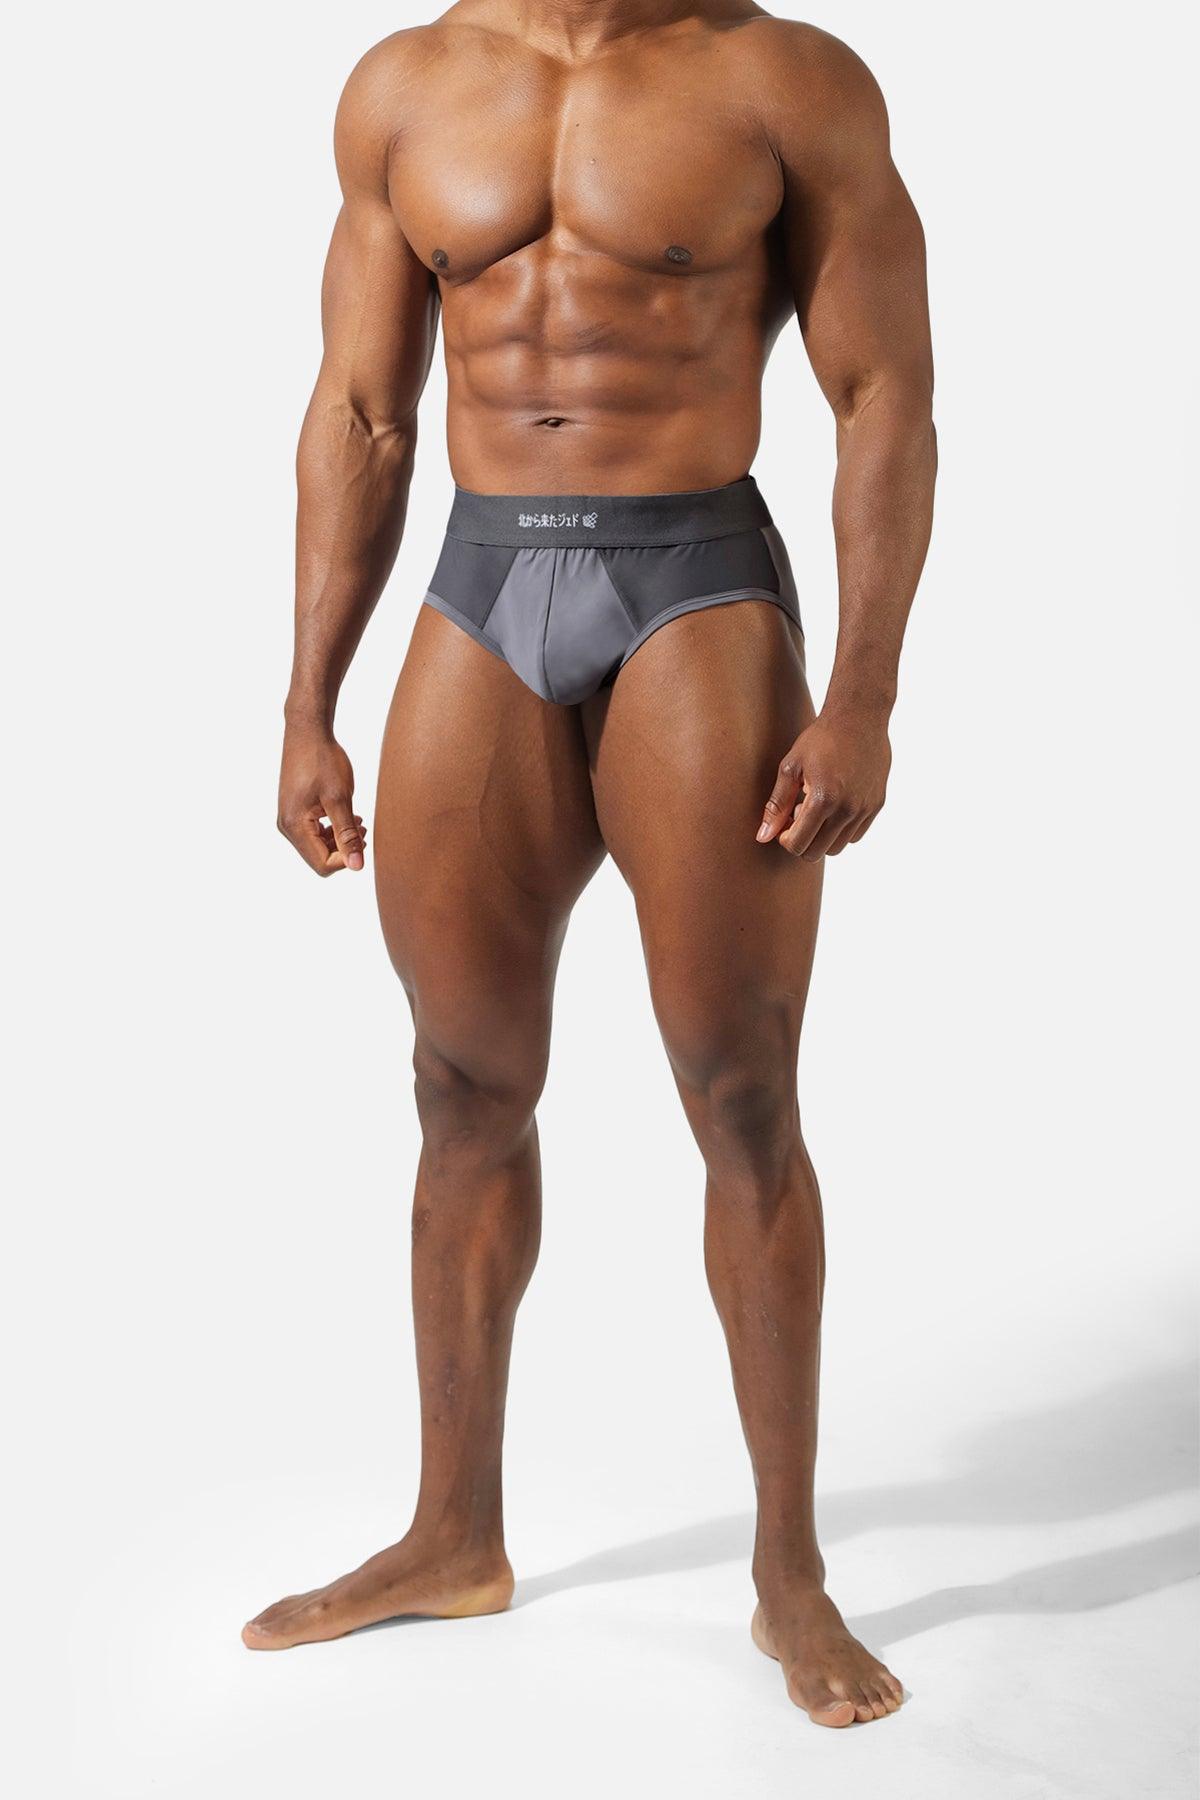 All Over Mesh Briefs - Blended Tan